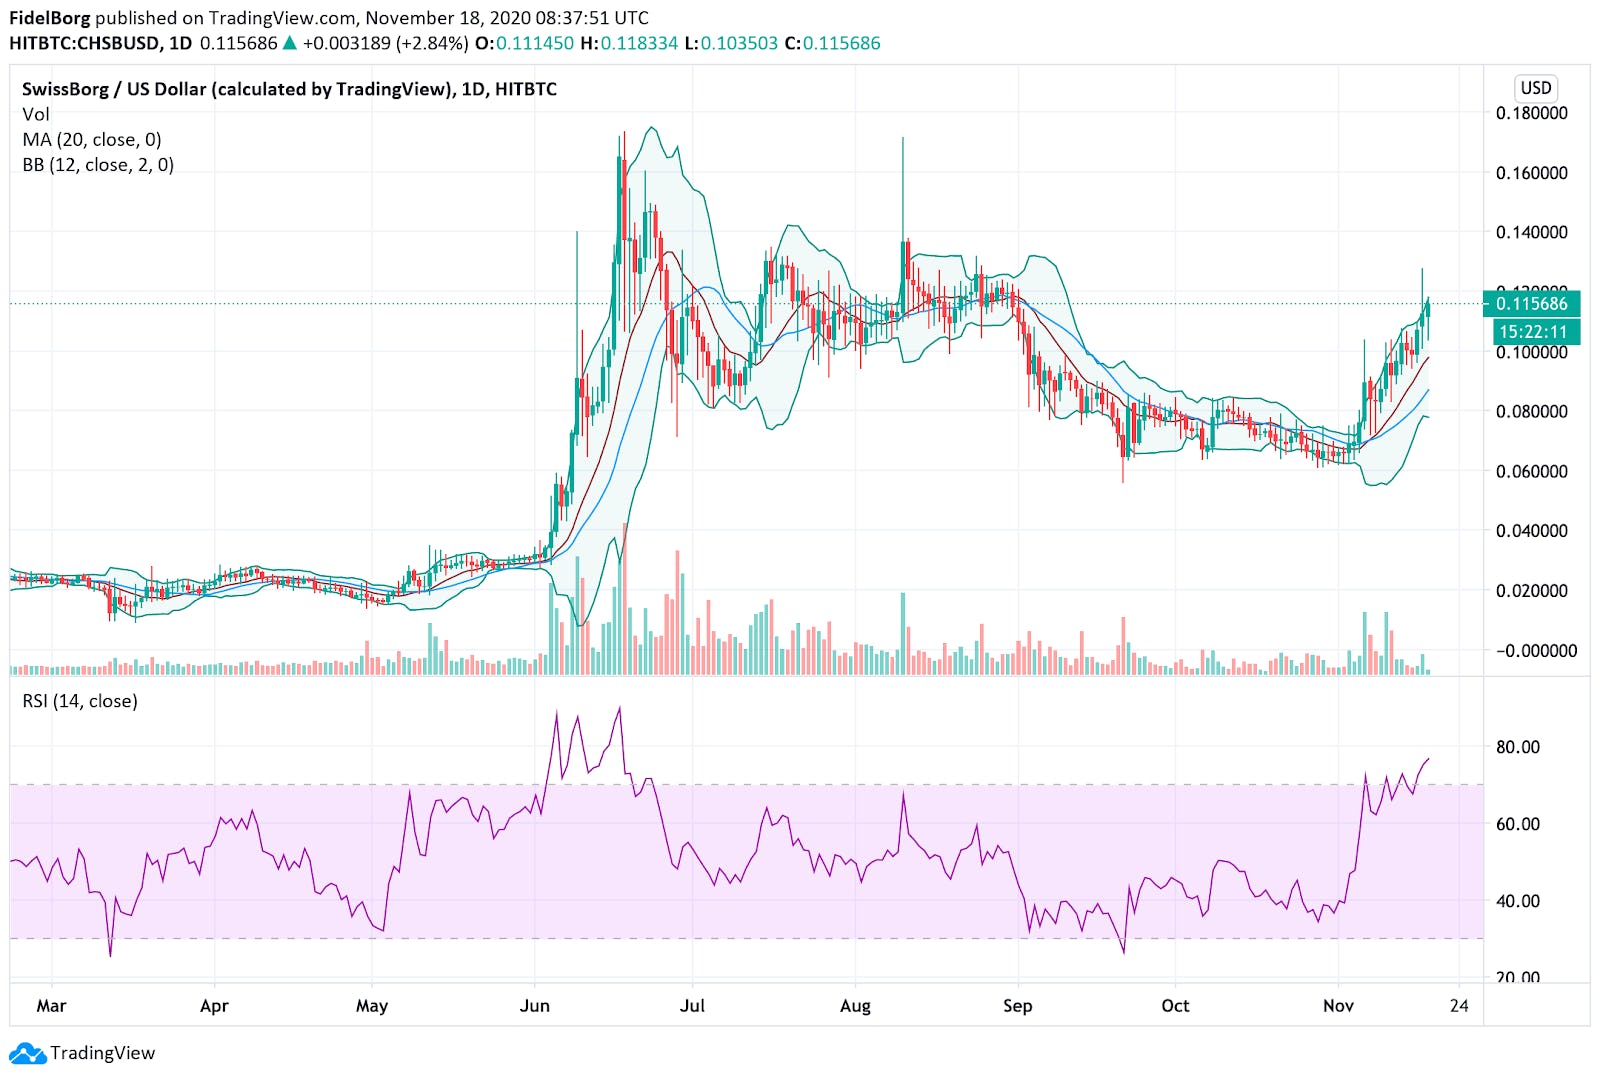 CHSB/USD (daily): RSI(14), 20 days moving average and Bollinger bands (Source: tradingview.com)